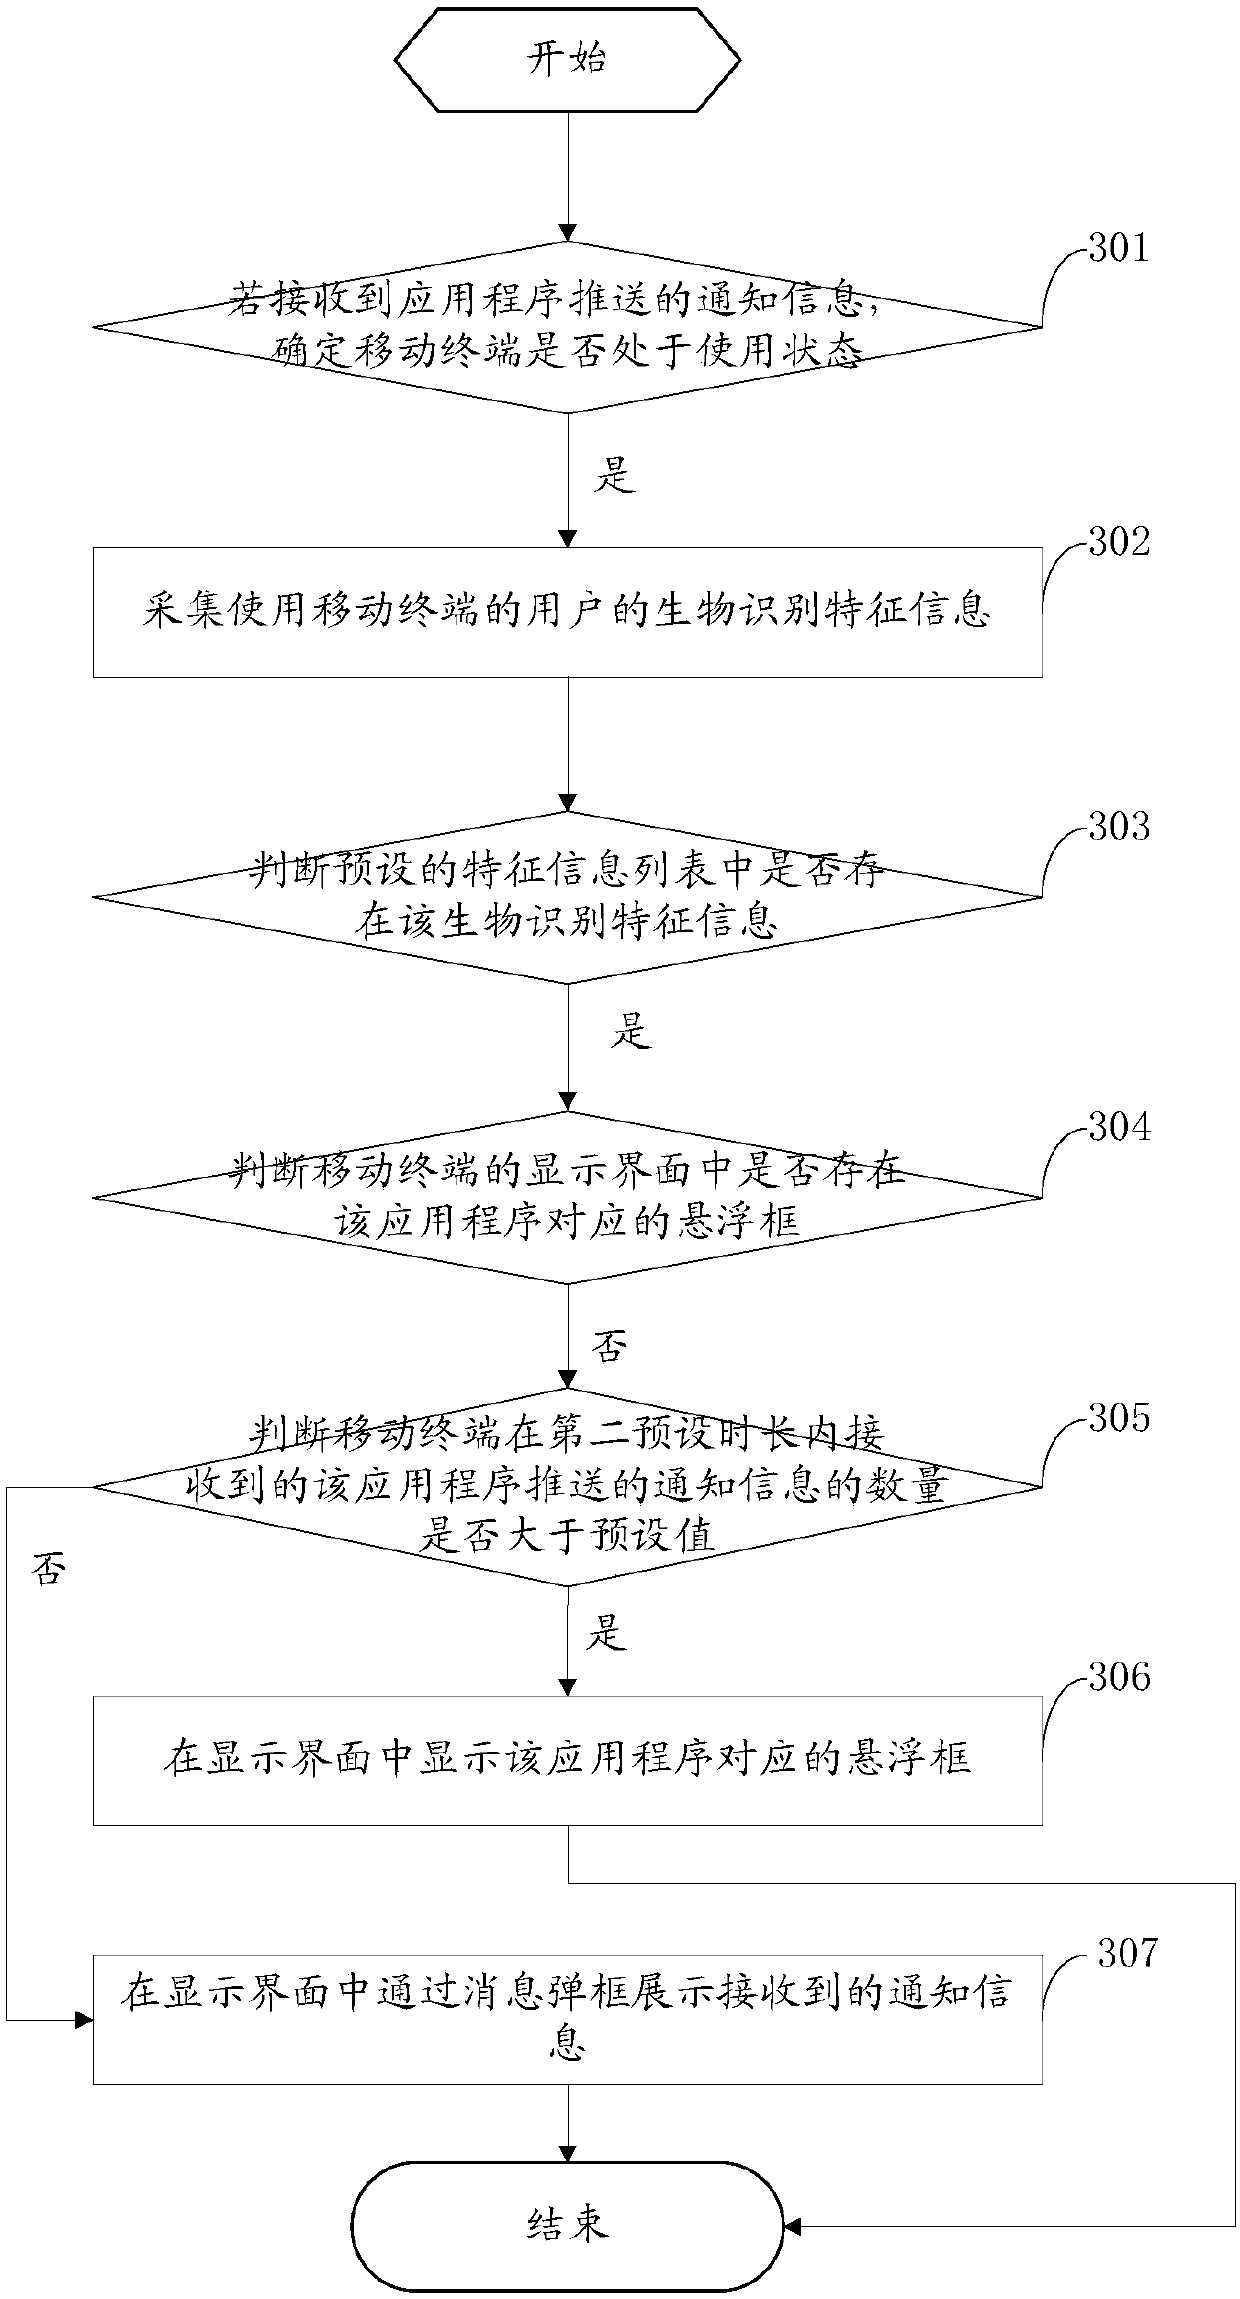 Notification information processing method and mobile terminal